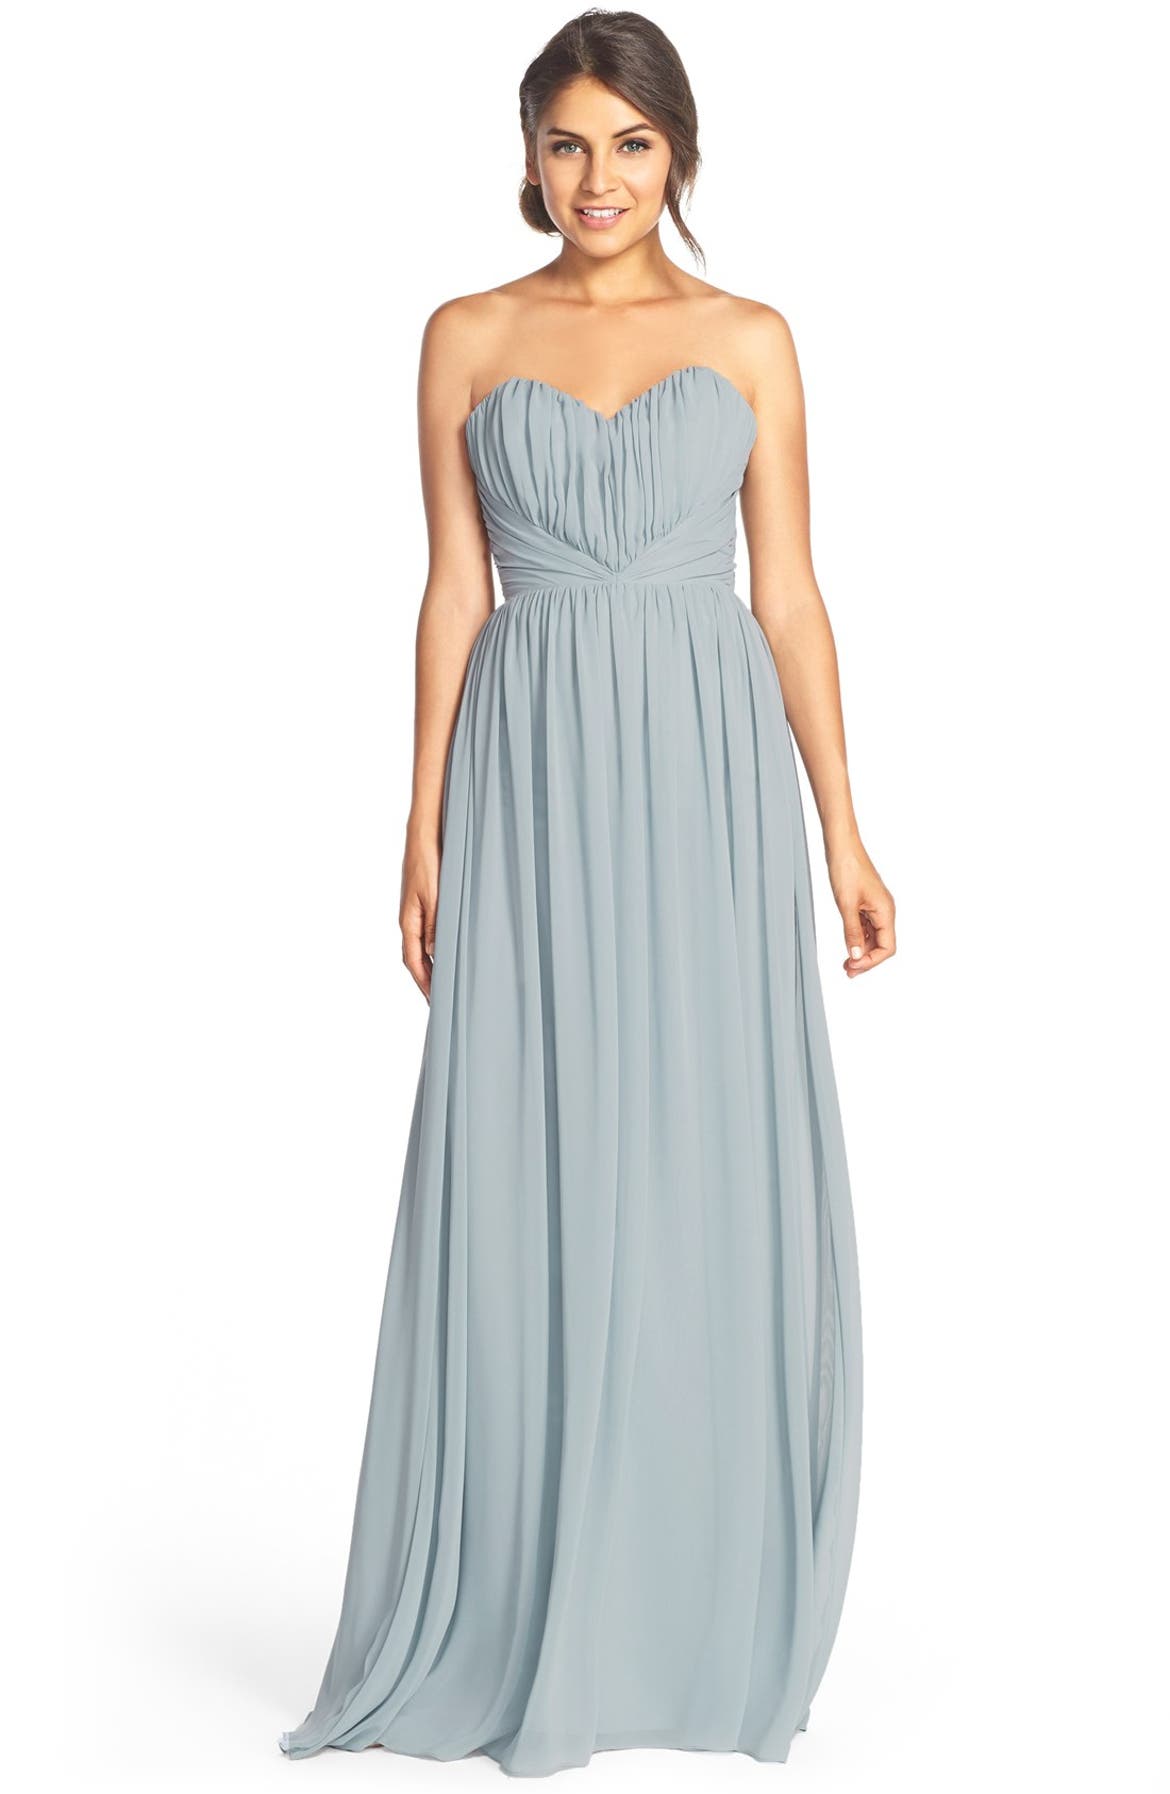 Jim Hjelm Occasions Strapless Chiffon Sweetheart A-Line Gown | Nordstrom